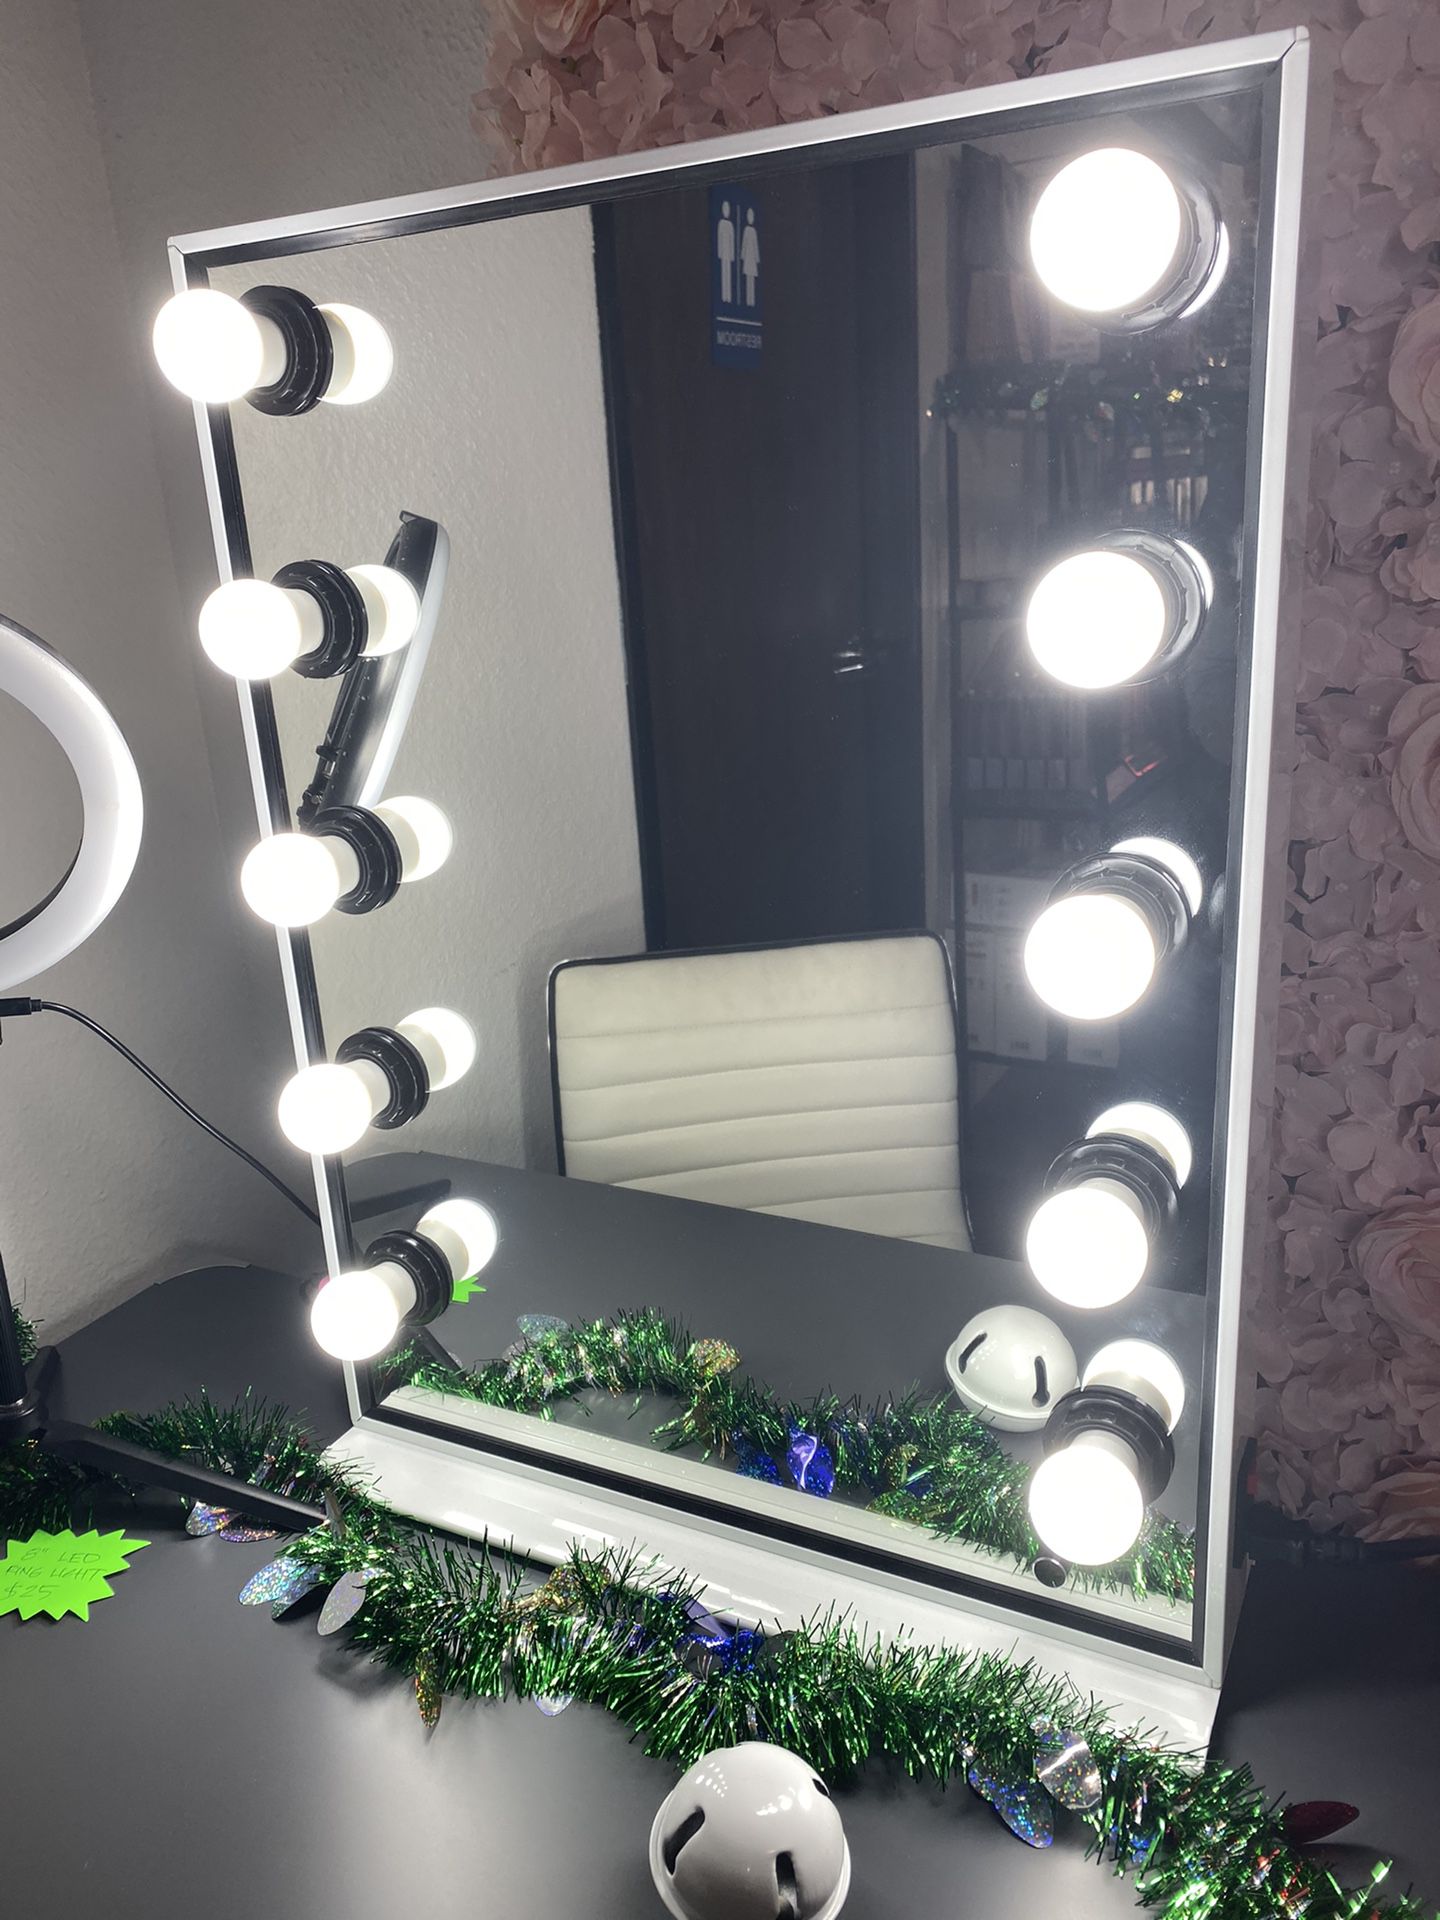 💋💄💡26" x 20" Hollywood Style LED Vanity Mirror with Dimmable Light Bulbs for Makeup Vanity Table Set in Dressing Room💋💄💡